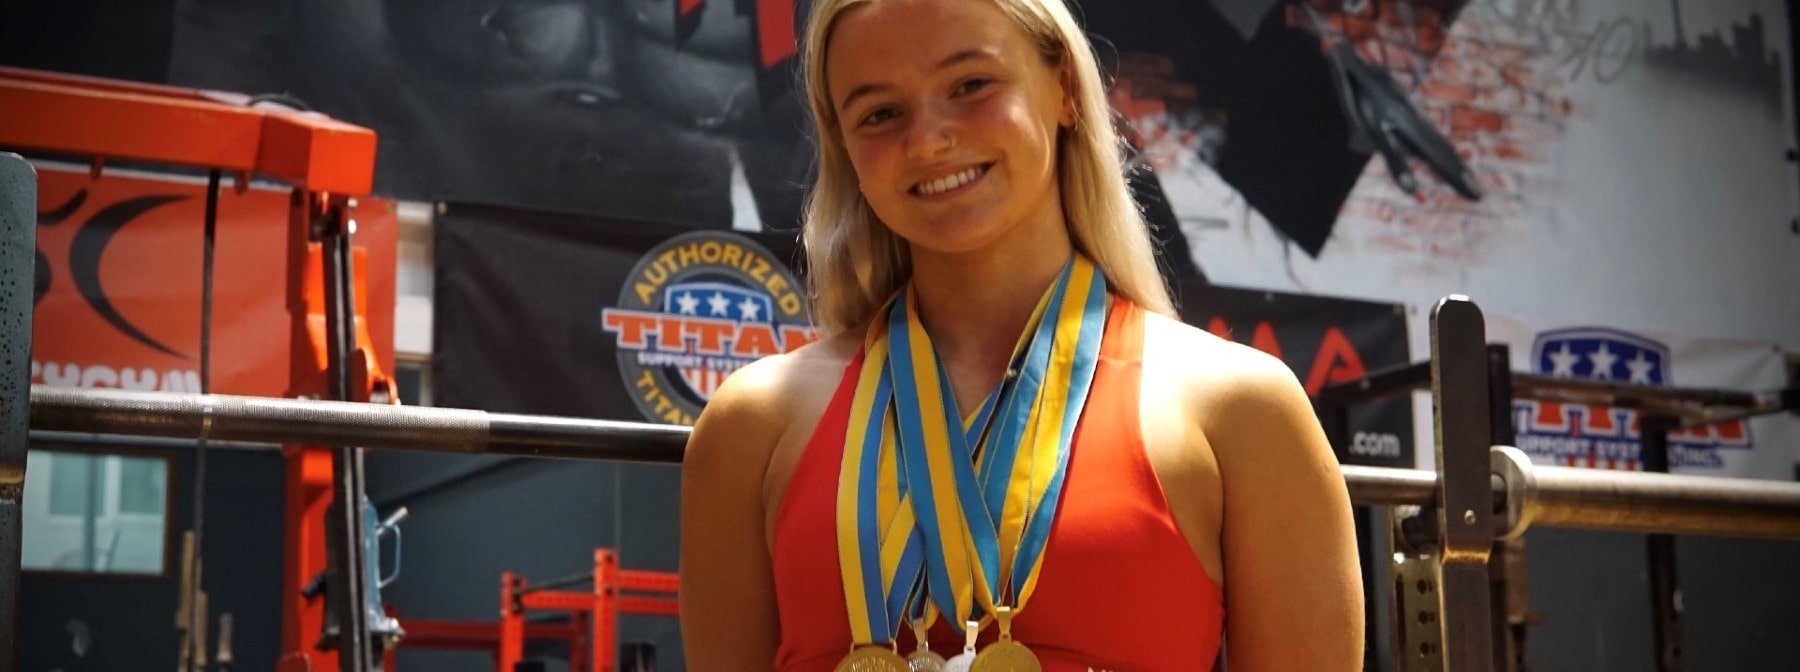 Campeona mundial junior de powerlifting a los 18 años | Laoise Quinn Road to G.O.A.T